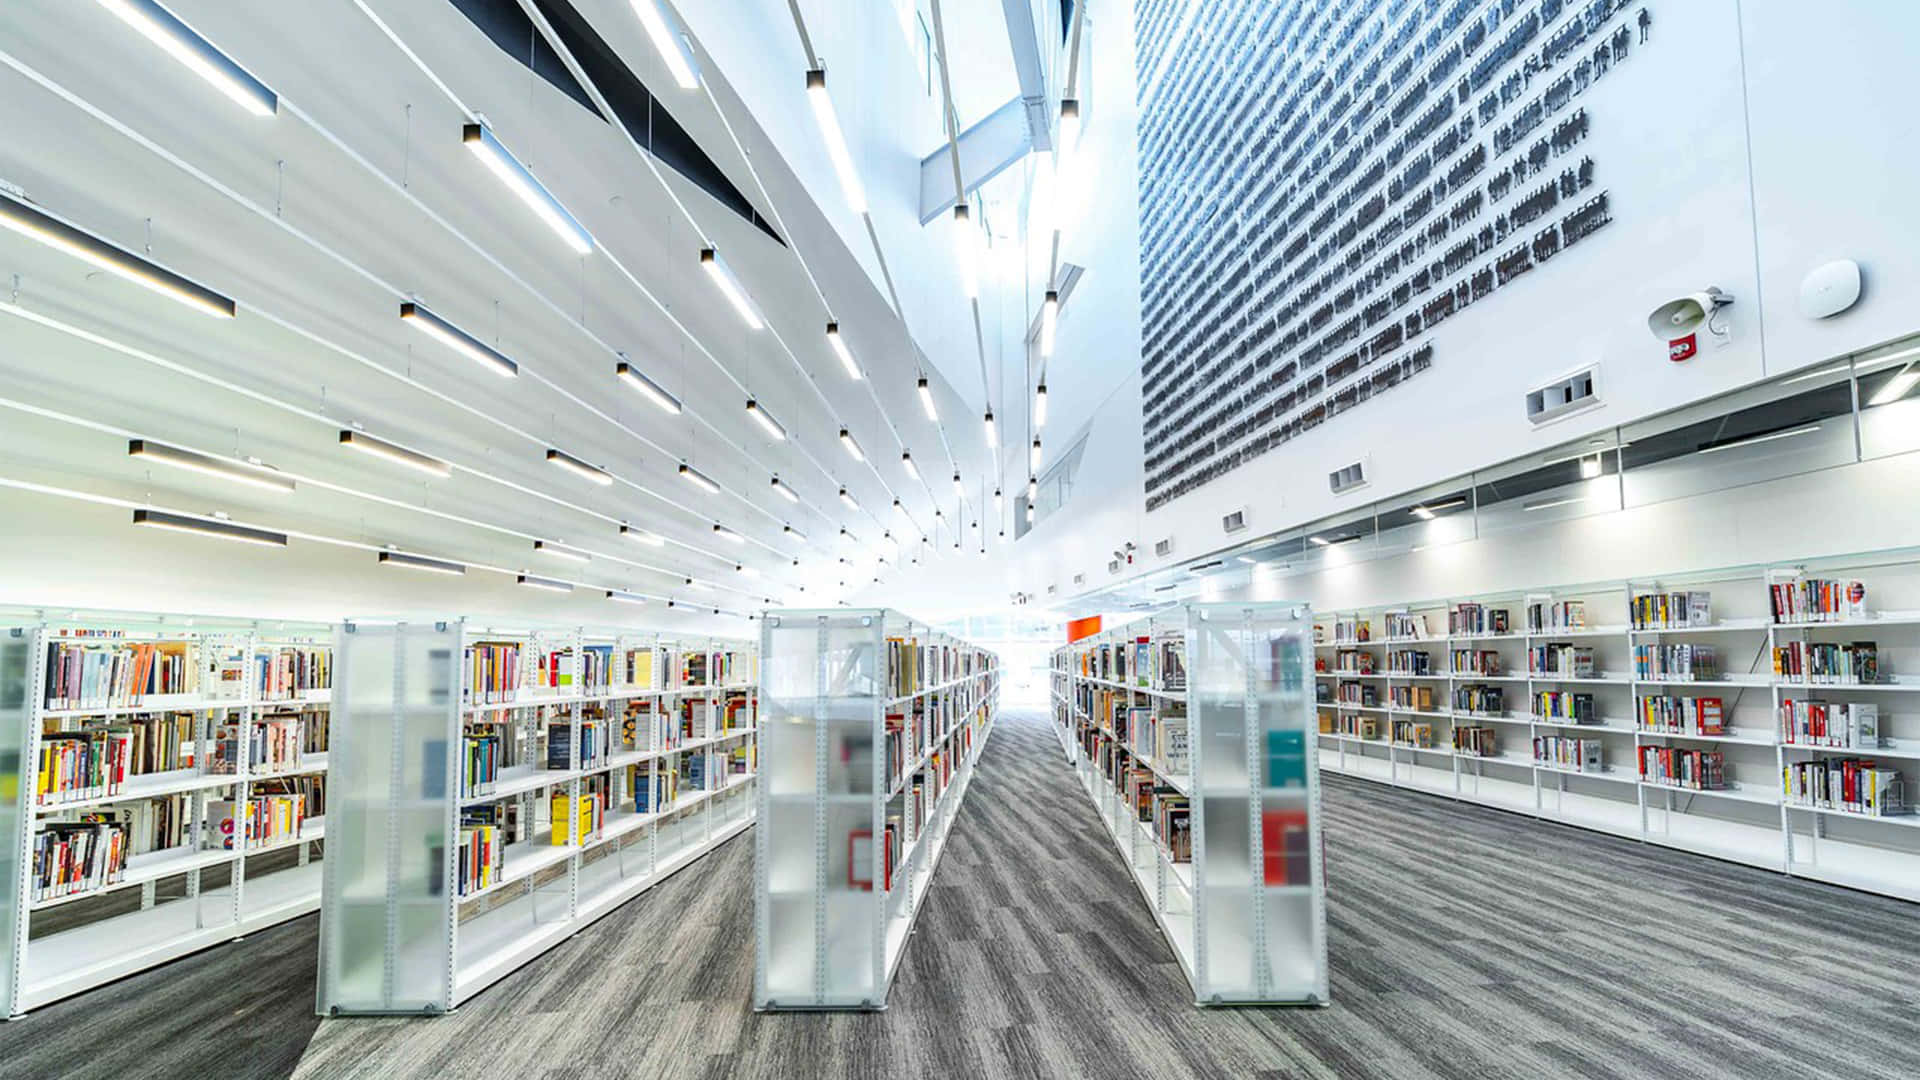 A Library With Shelves And Books On The Floor